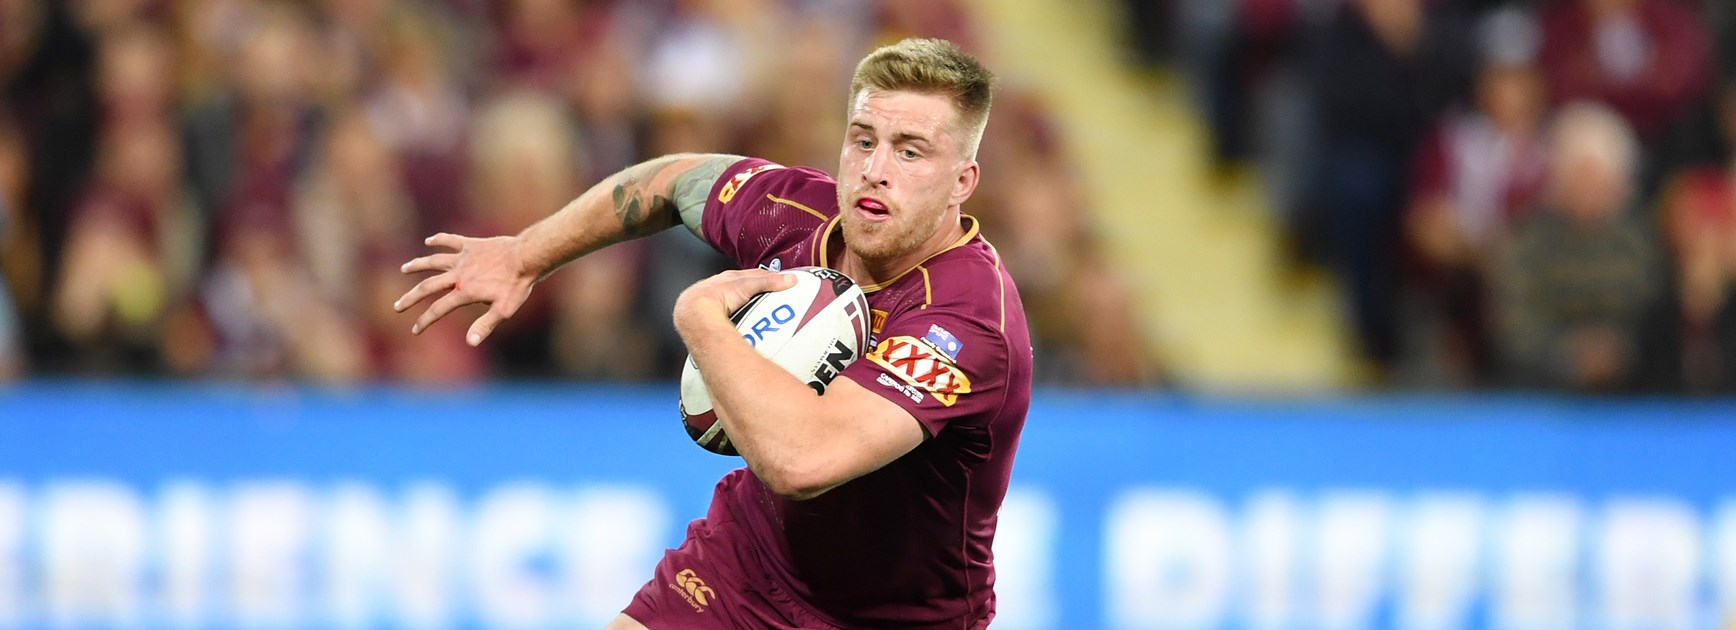 Ranking the Maroons spine candidates for Origin